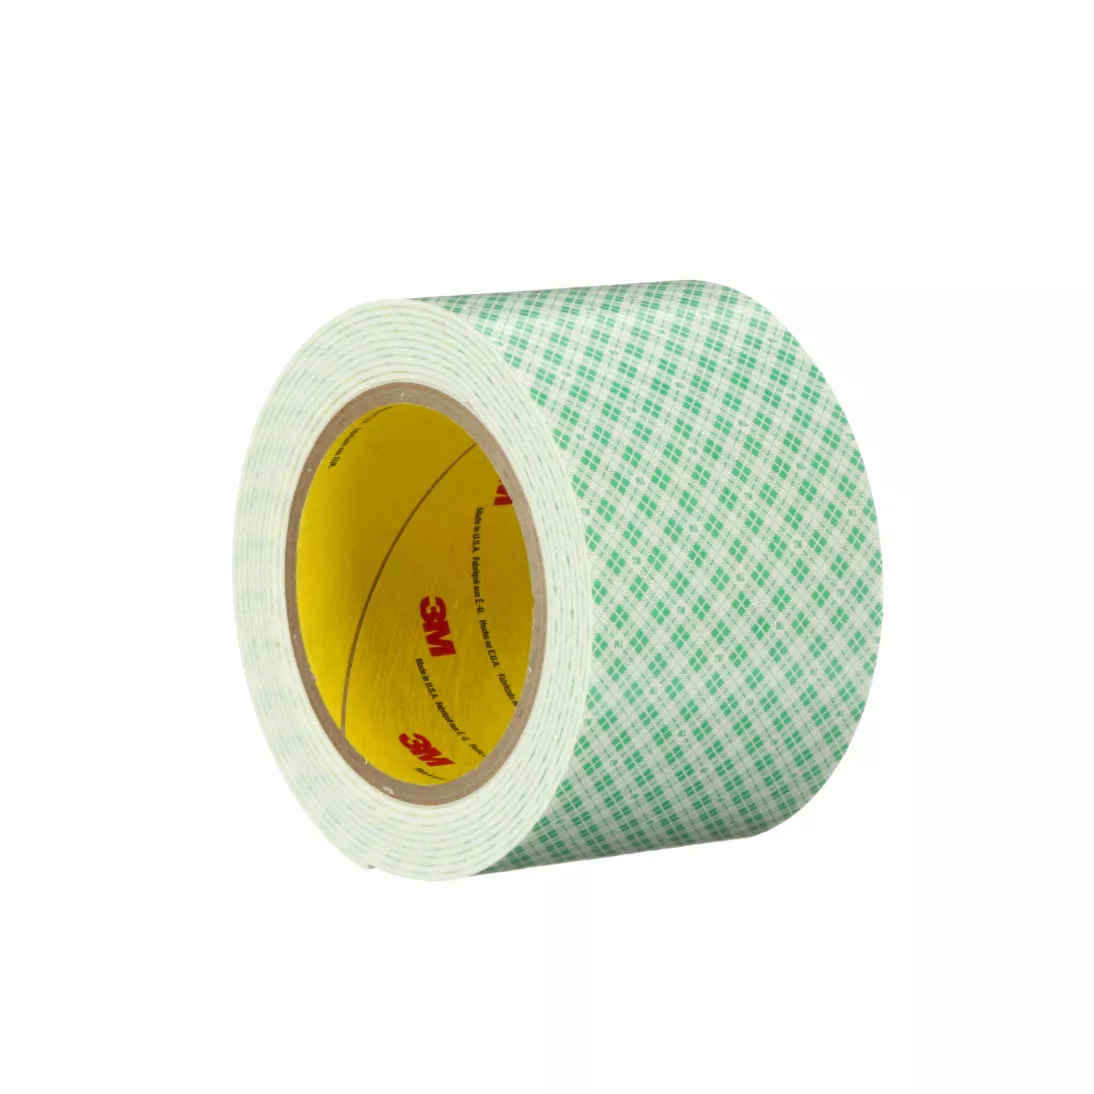 3M™ Double Coated Urethane Foam Tape 4026, Natural, 24 in x 36 yd, 62
mil, 1 roll per case